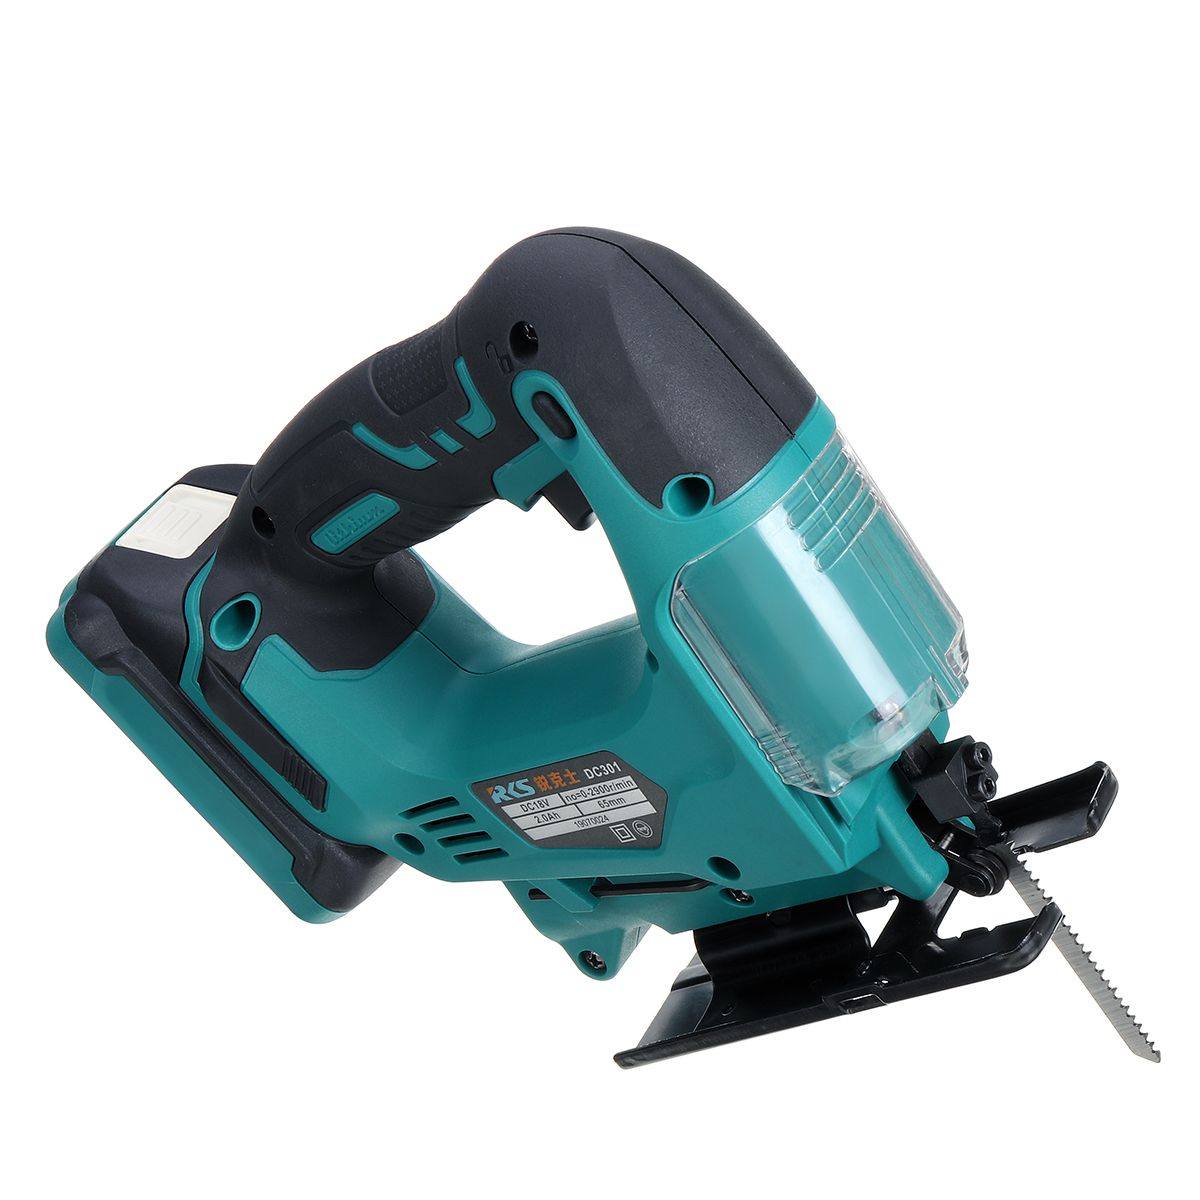 18V-900W-Electric-Jig-Saw-Power-Tool-Cordless-Quick-Blade-Change-Electric-Saw-LED-Light-1574371